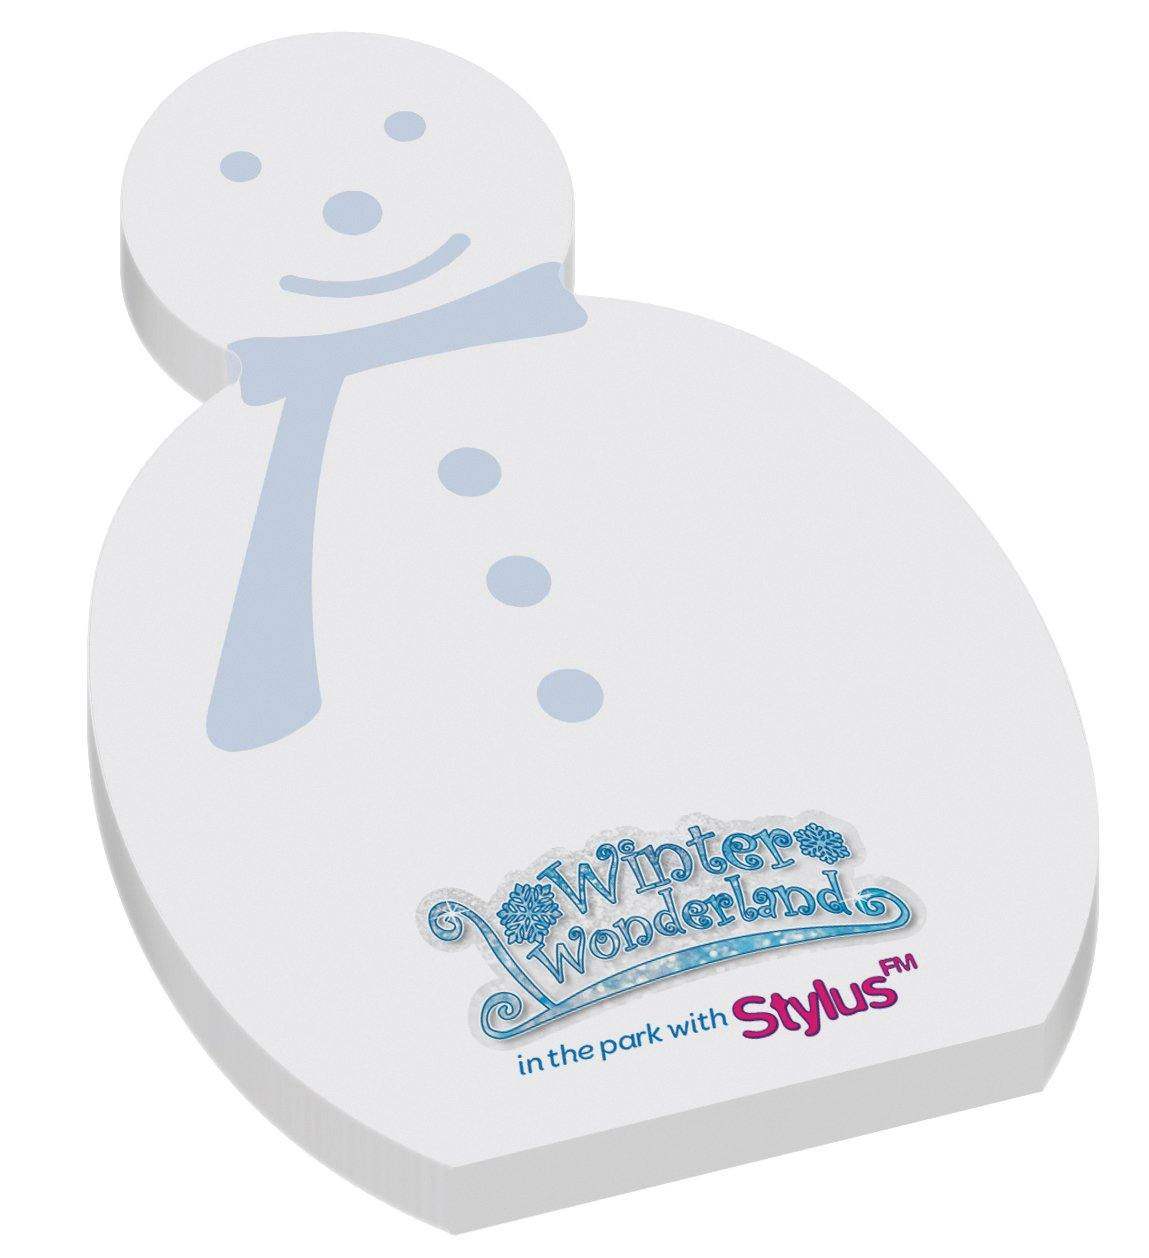 Sticky-Smart Snowman - Promotions Only Group Limited